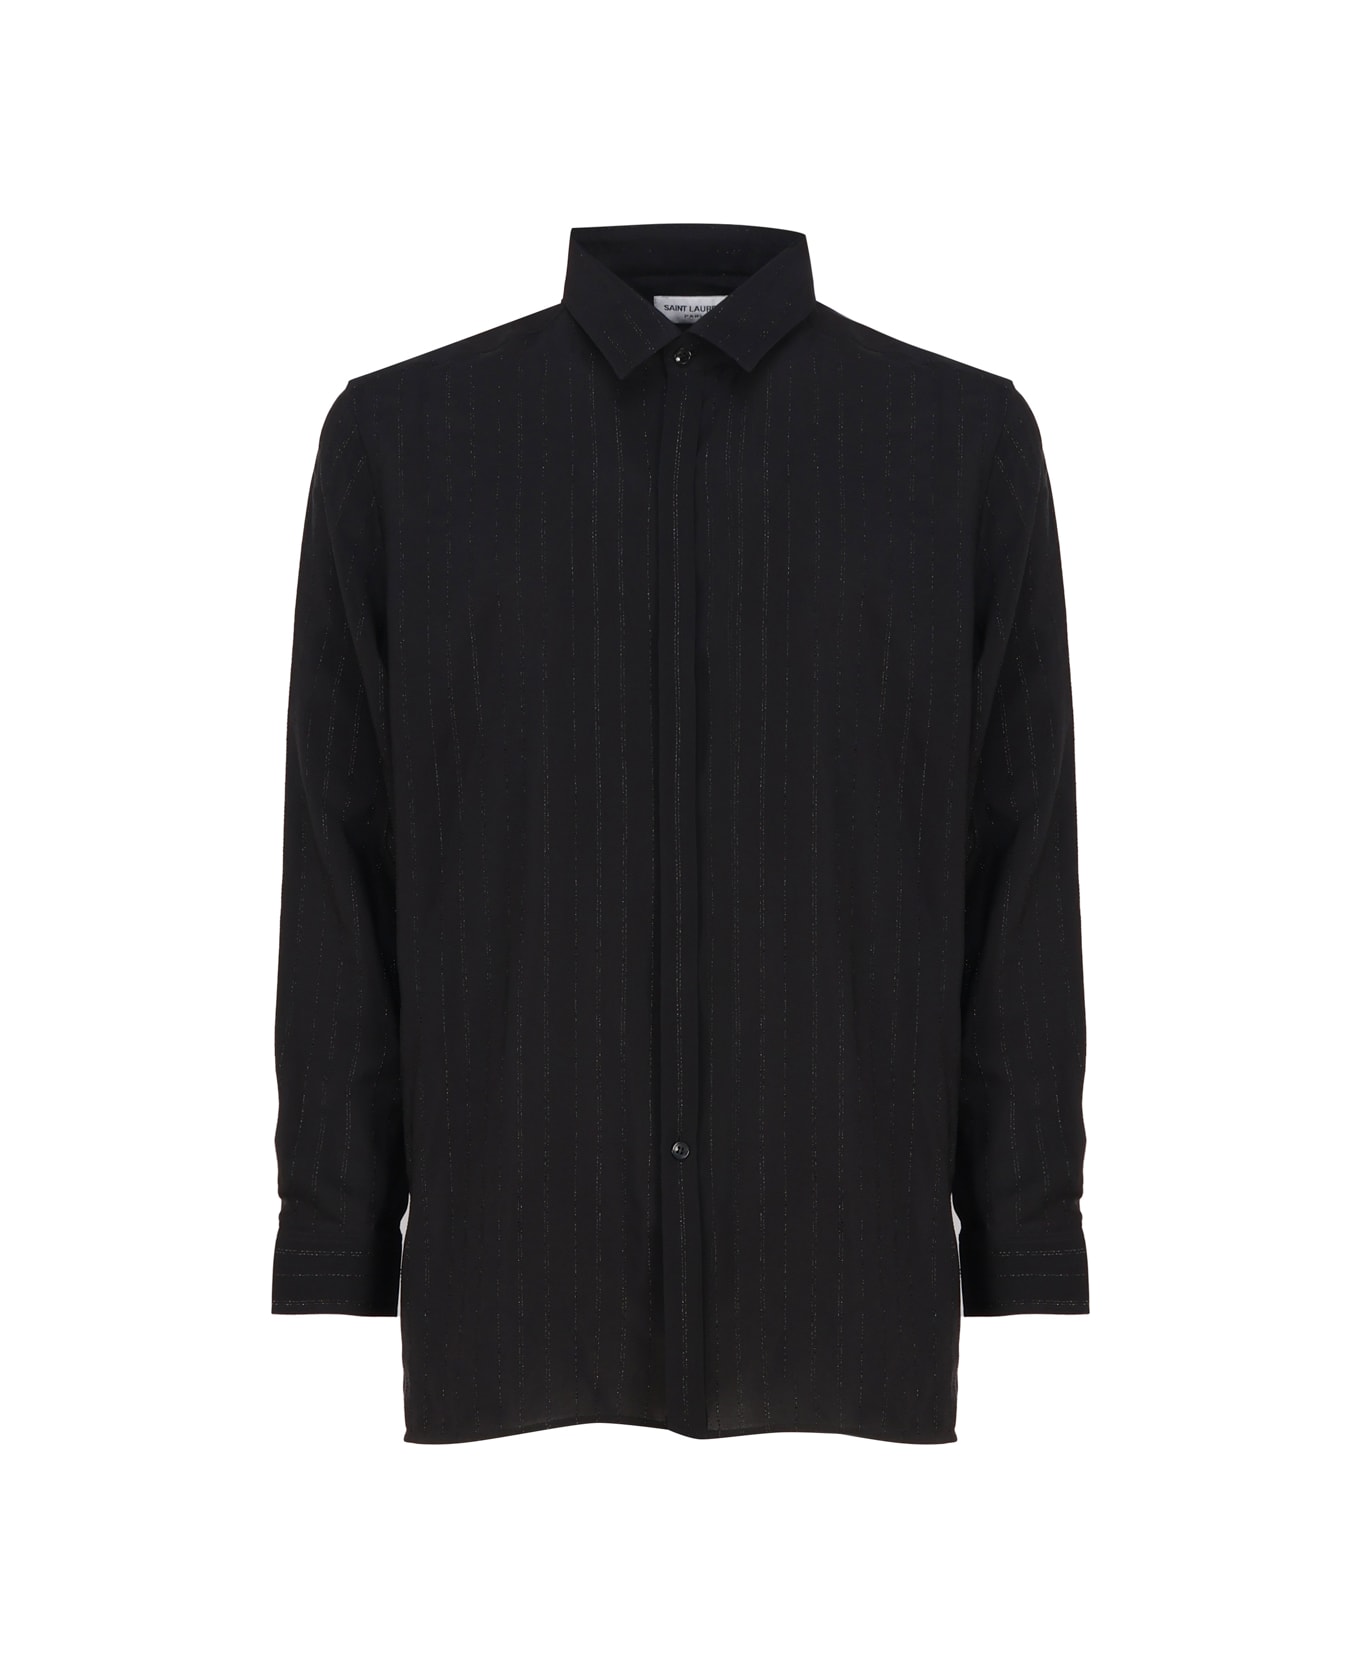 Saint Laurent Shirt With Buttons And Pointed Collar - Black